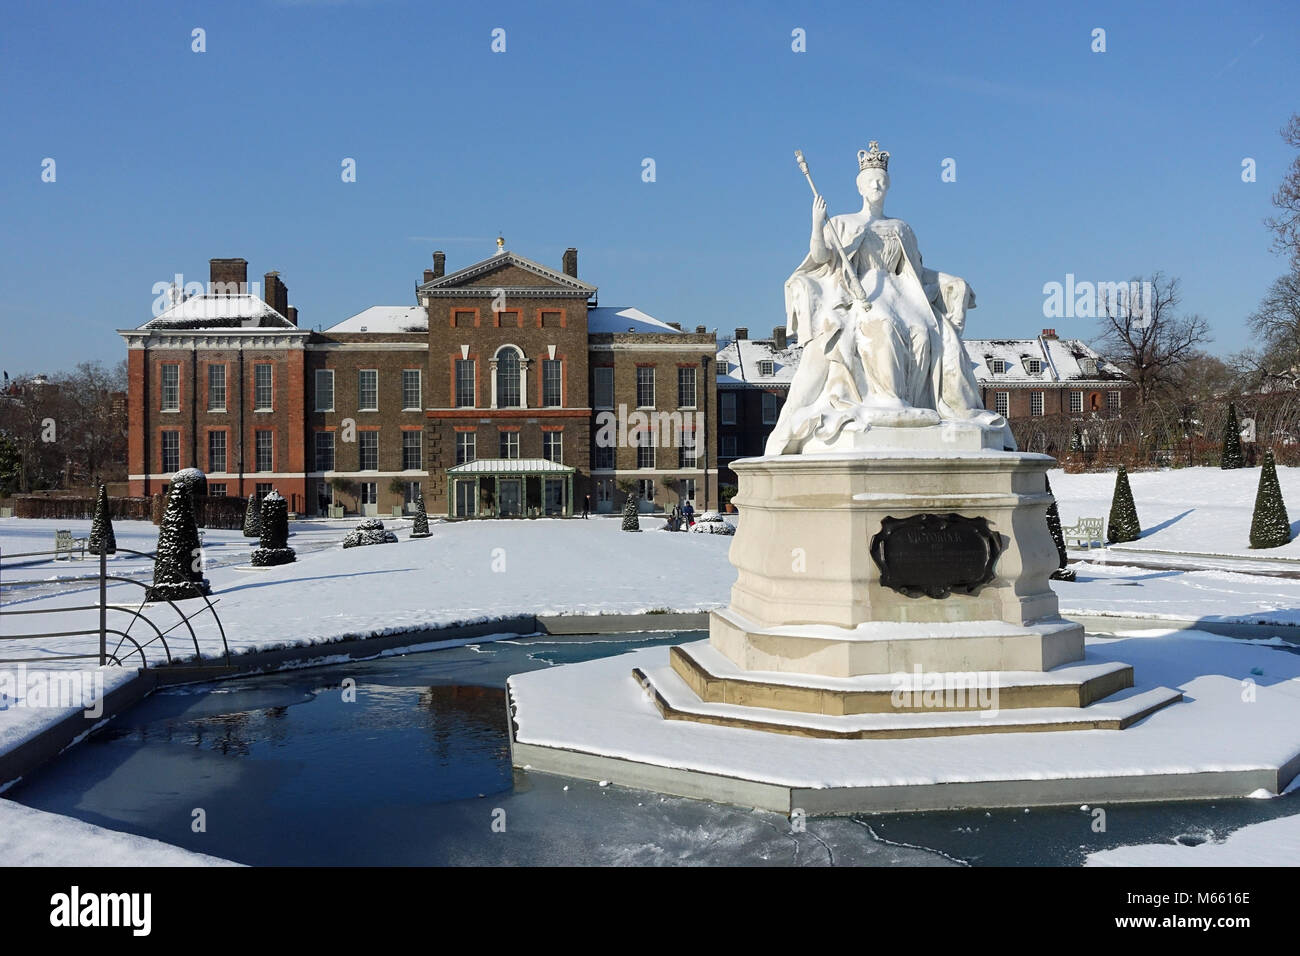 Front view of Kensington Palace and Queen Victoria statue in London on a cold winter day with snow from the Beast from the East cold spell in 2018 Stock Photo